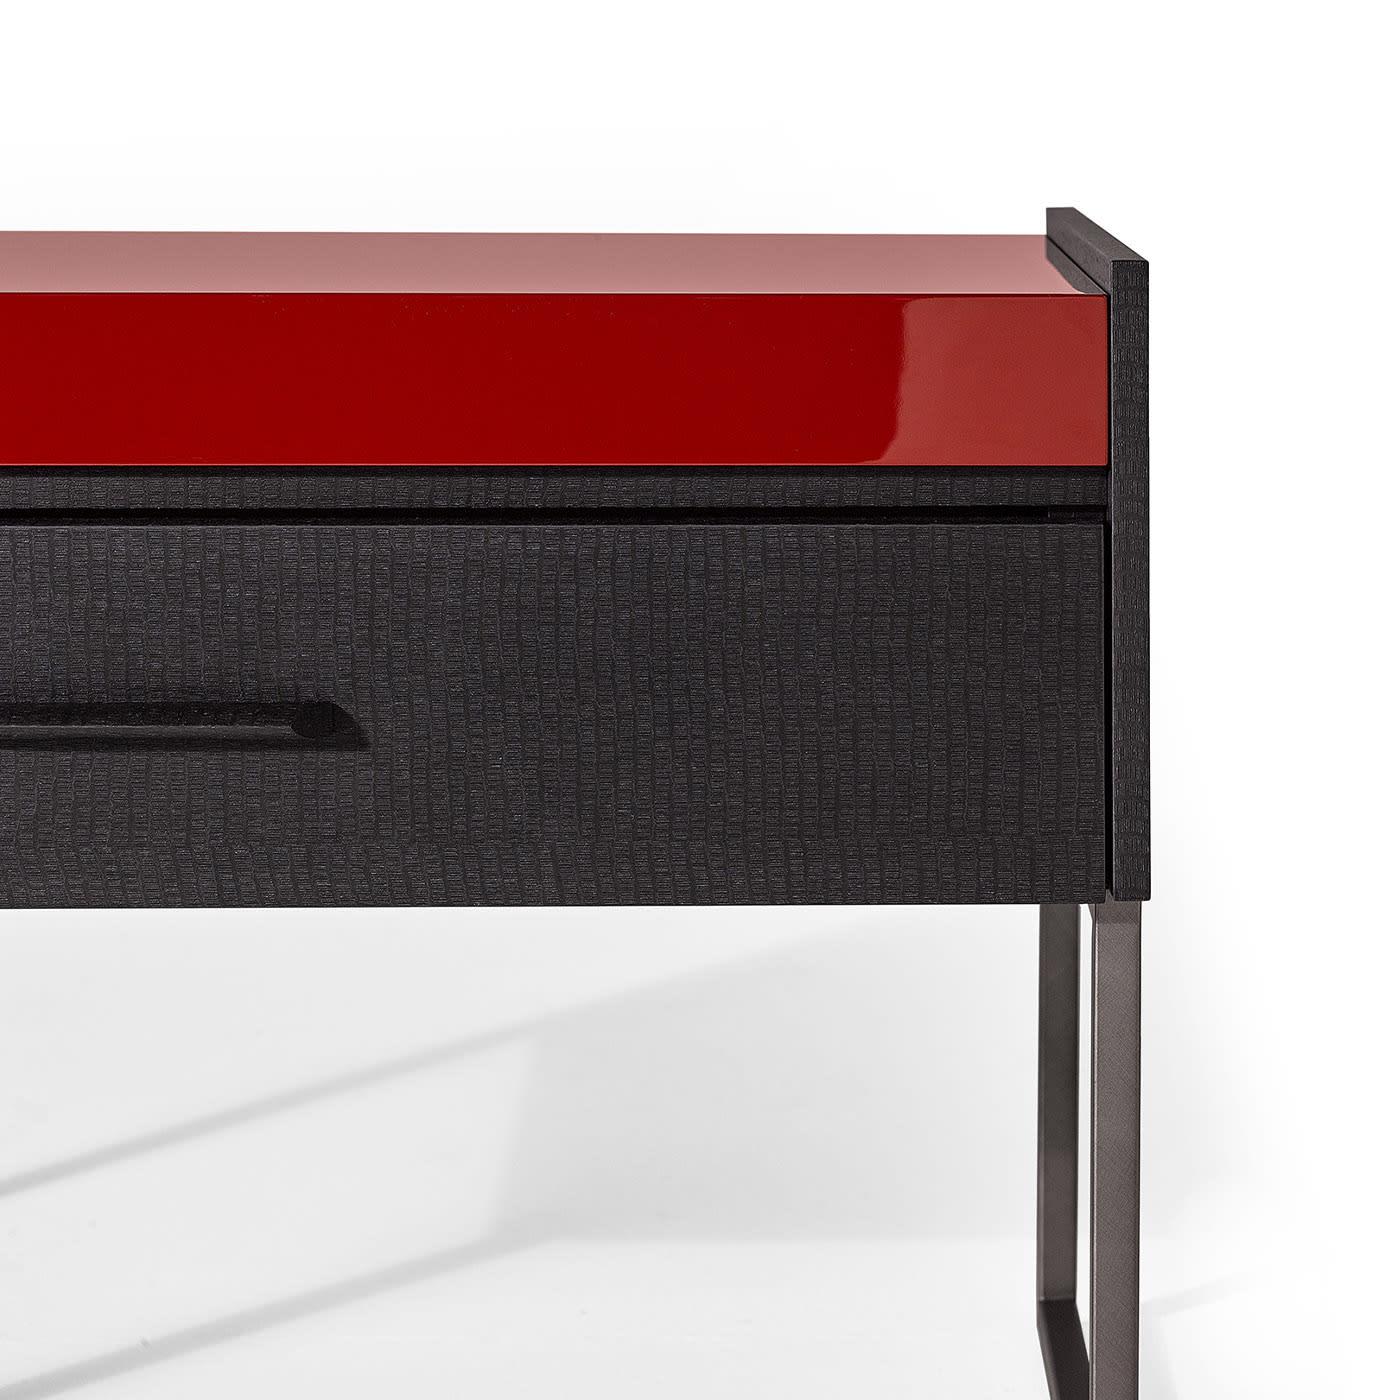 Bedside table composed of 1 drawer. Particular finish in veneered wood with a Python effect designed by the architect Piero Lissoni. Made up of metal legs, wooden handle, and glossy red lacquer. Matt Python finish. Graphite metal.